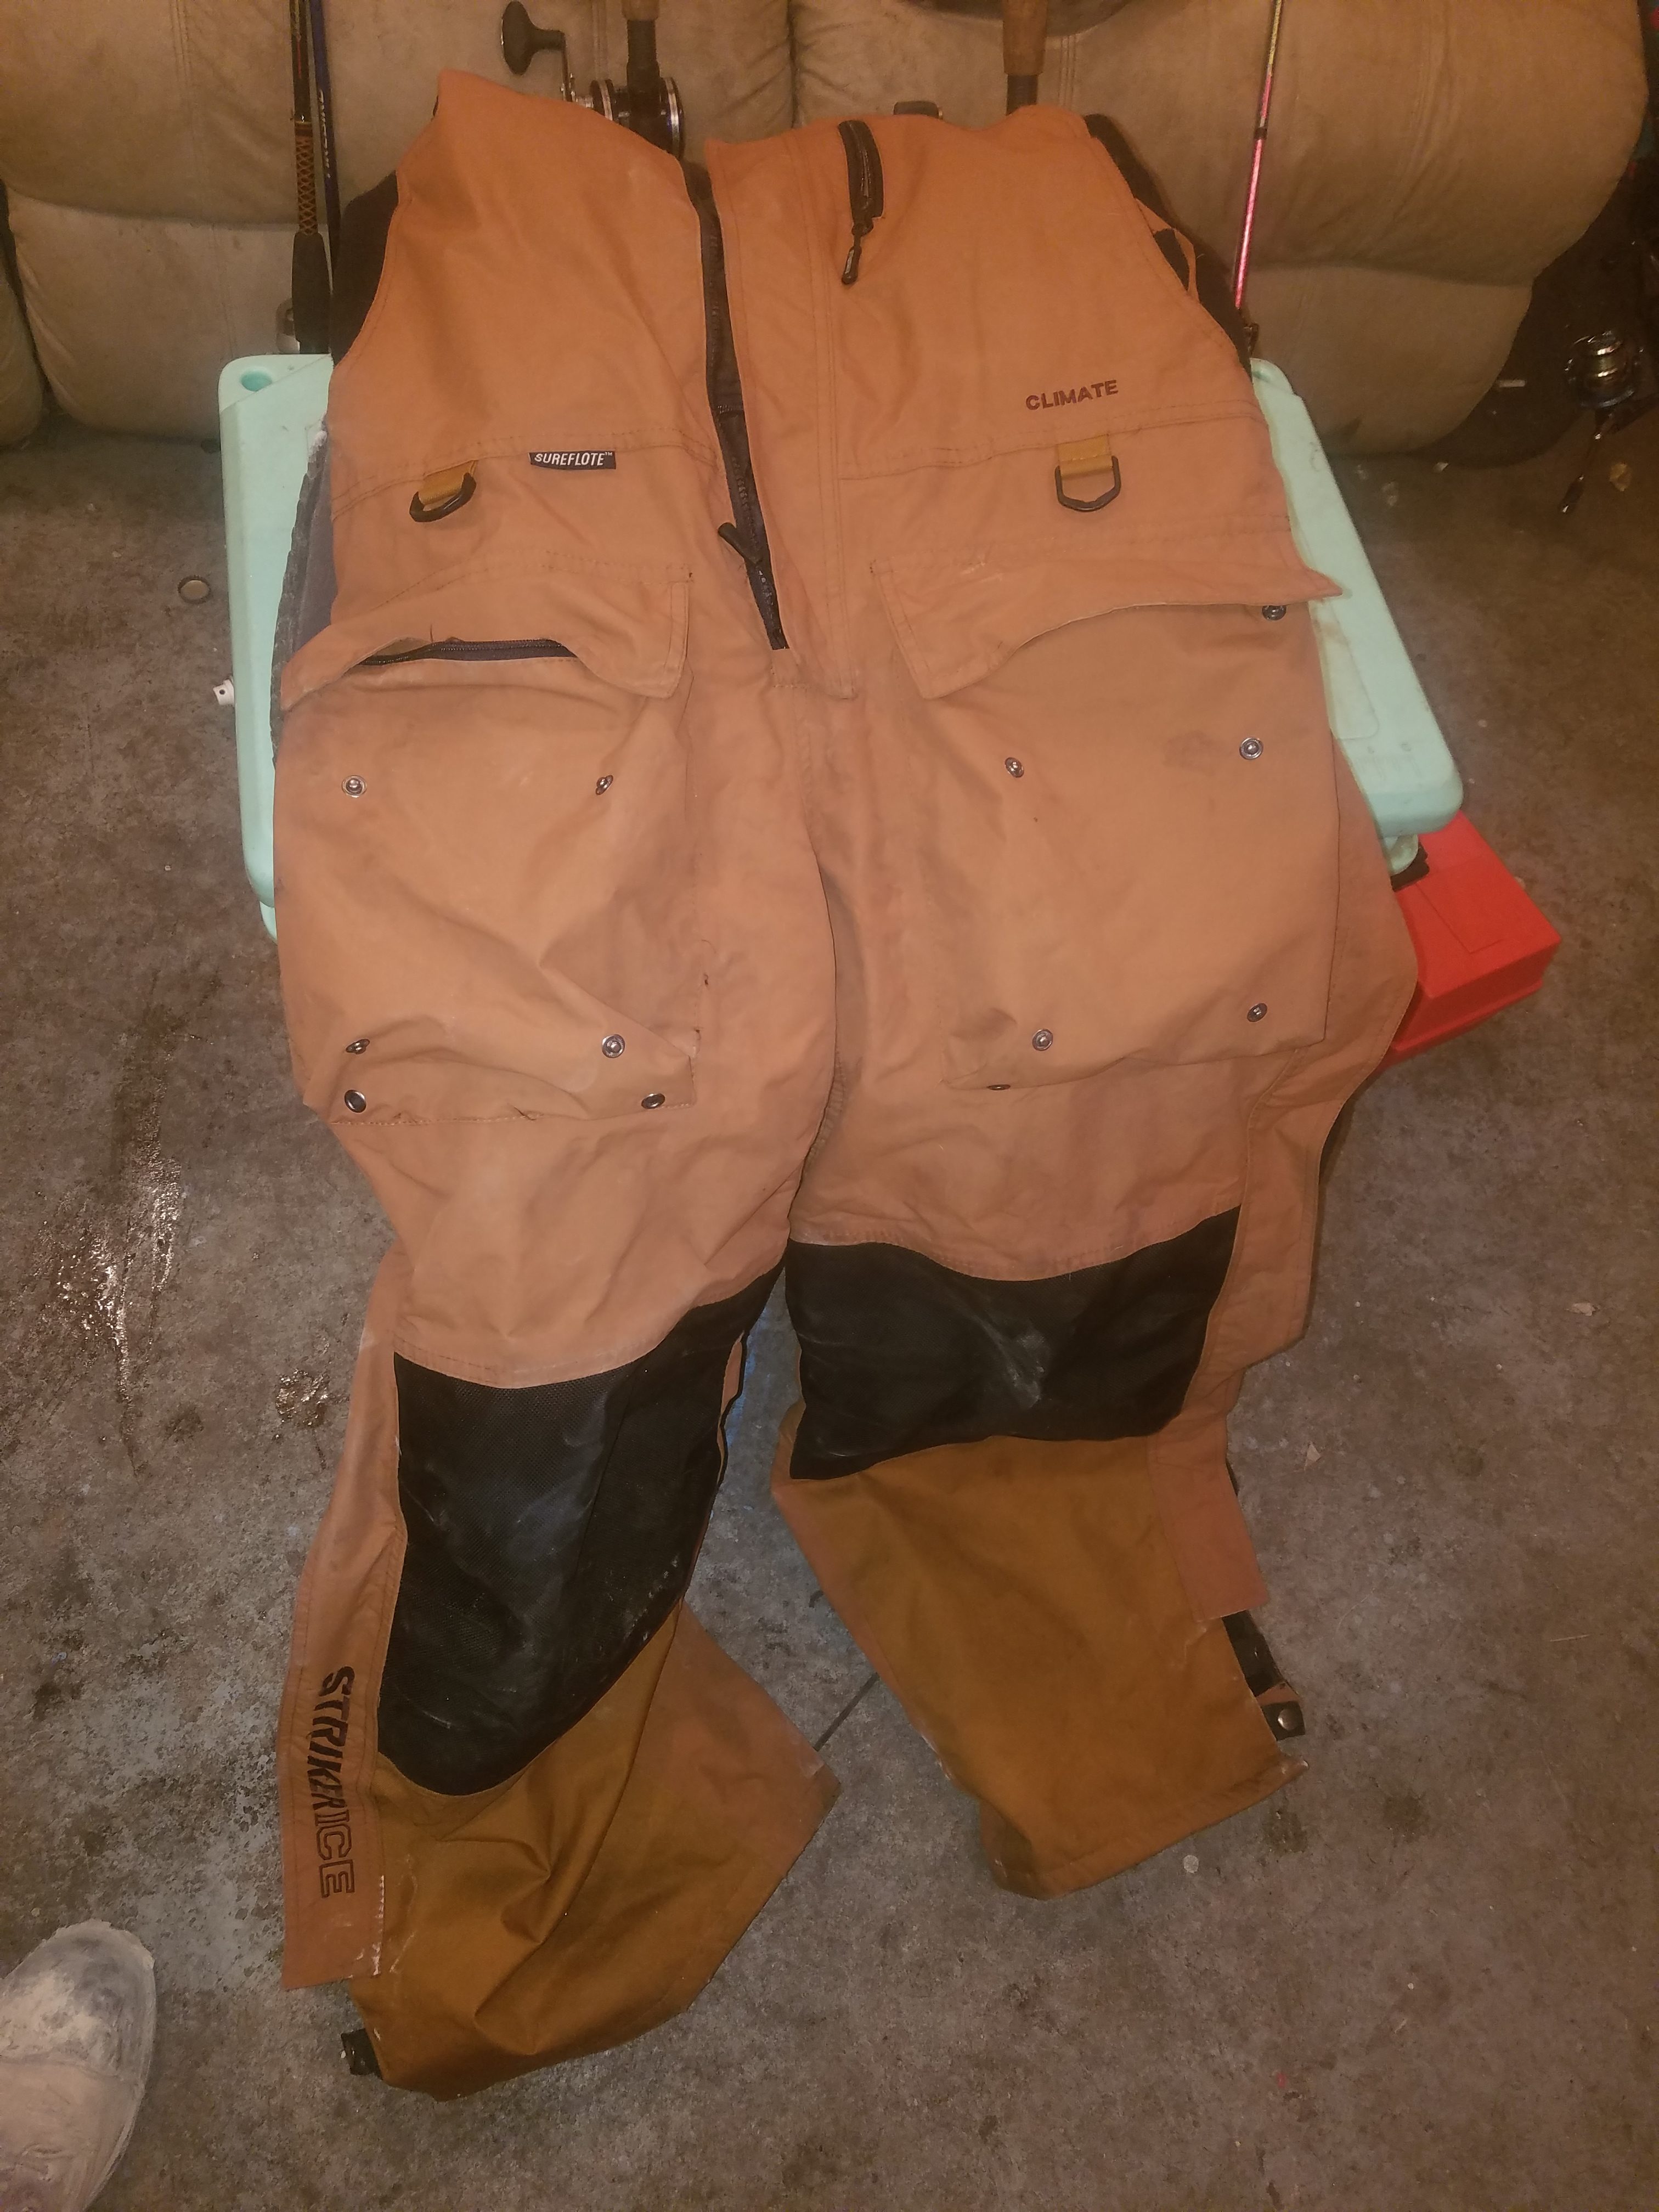 Striker ice climate suit, large jacket and bibs - Classified Ads ...